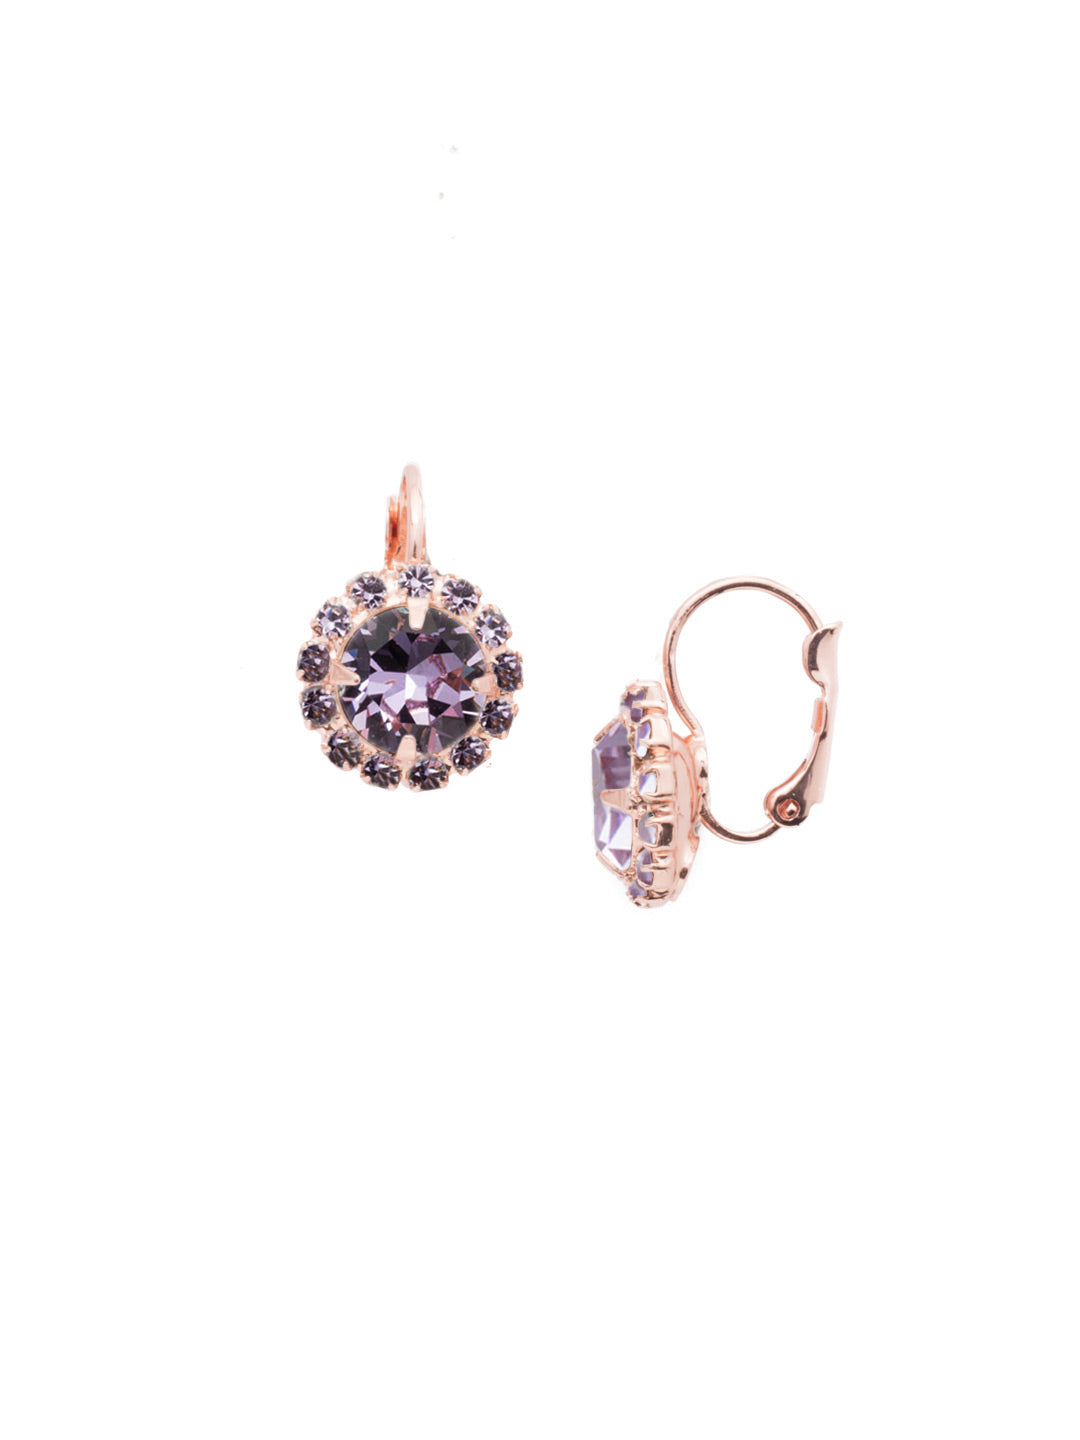 Haute Halo Dangle Earrings - EDL10RGVI - <p>A central round crystal with an elegant halo of gems embodies elegance and style. From Sorrelli's Violet collection in our Rose Gold-tone finish.</p>